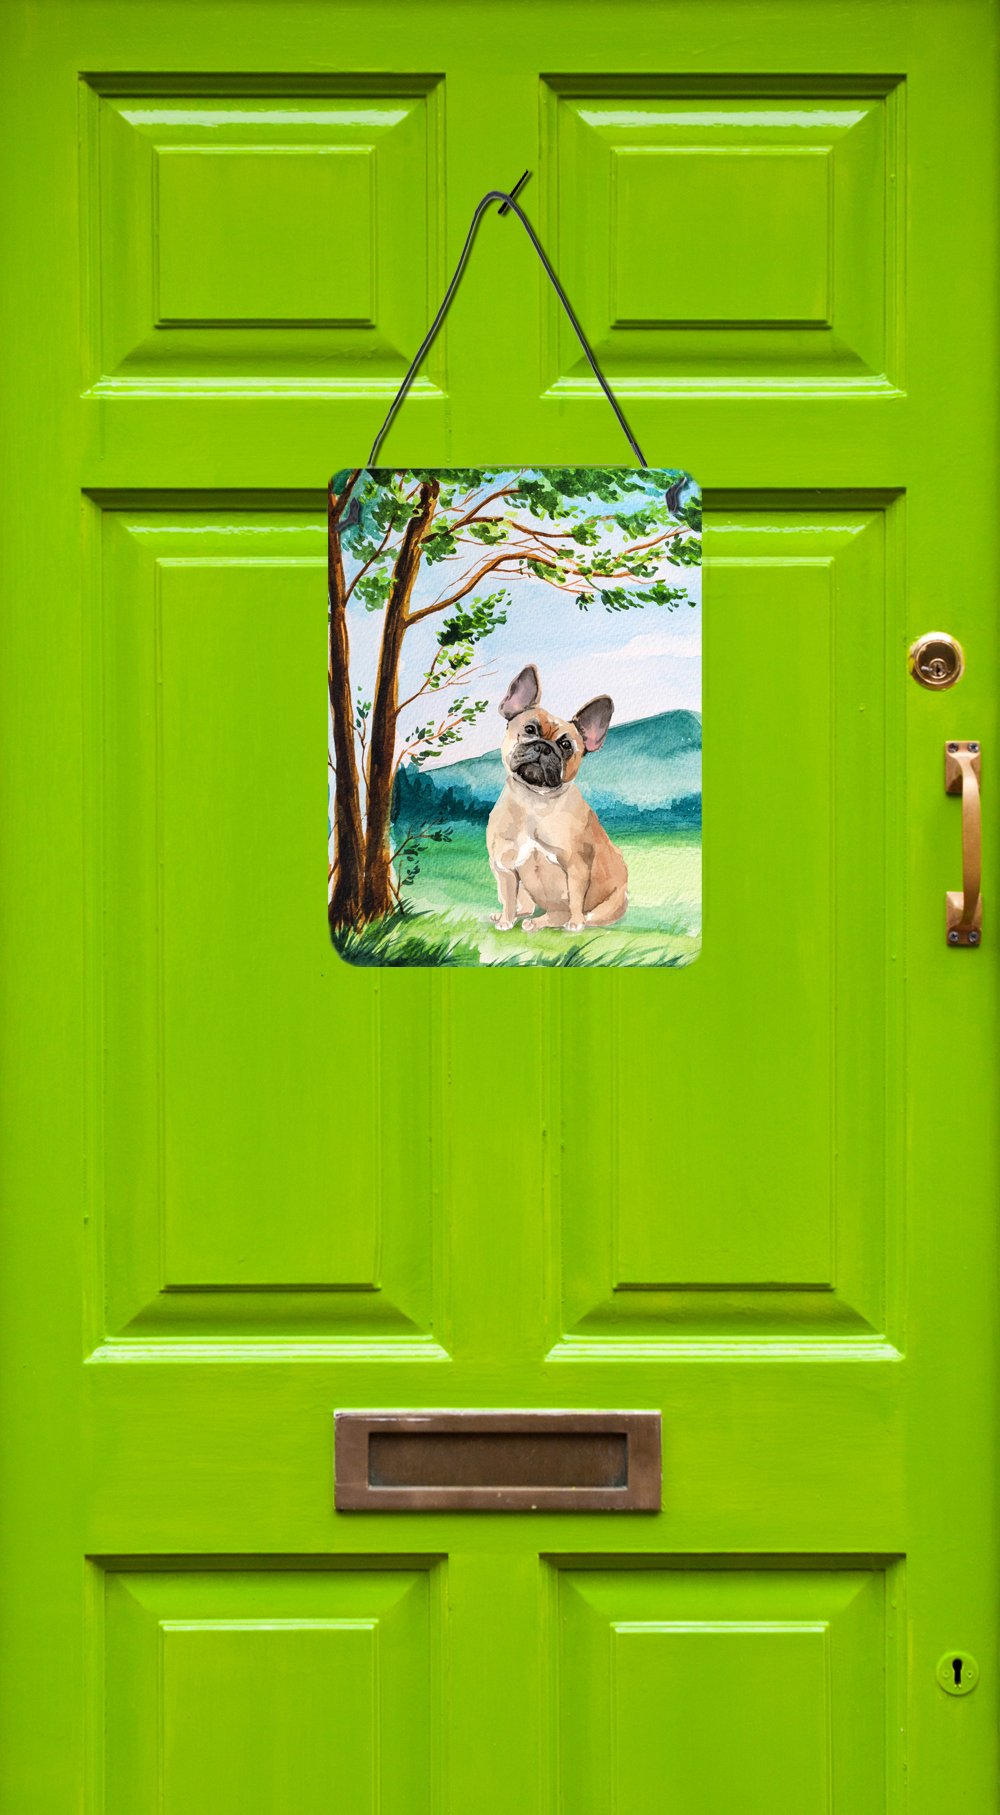 Under the Tree Fawn French Bulldog Wall or Door Hanging Prints CK2013DS1216 by Caroline's Treasures